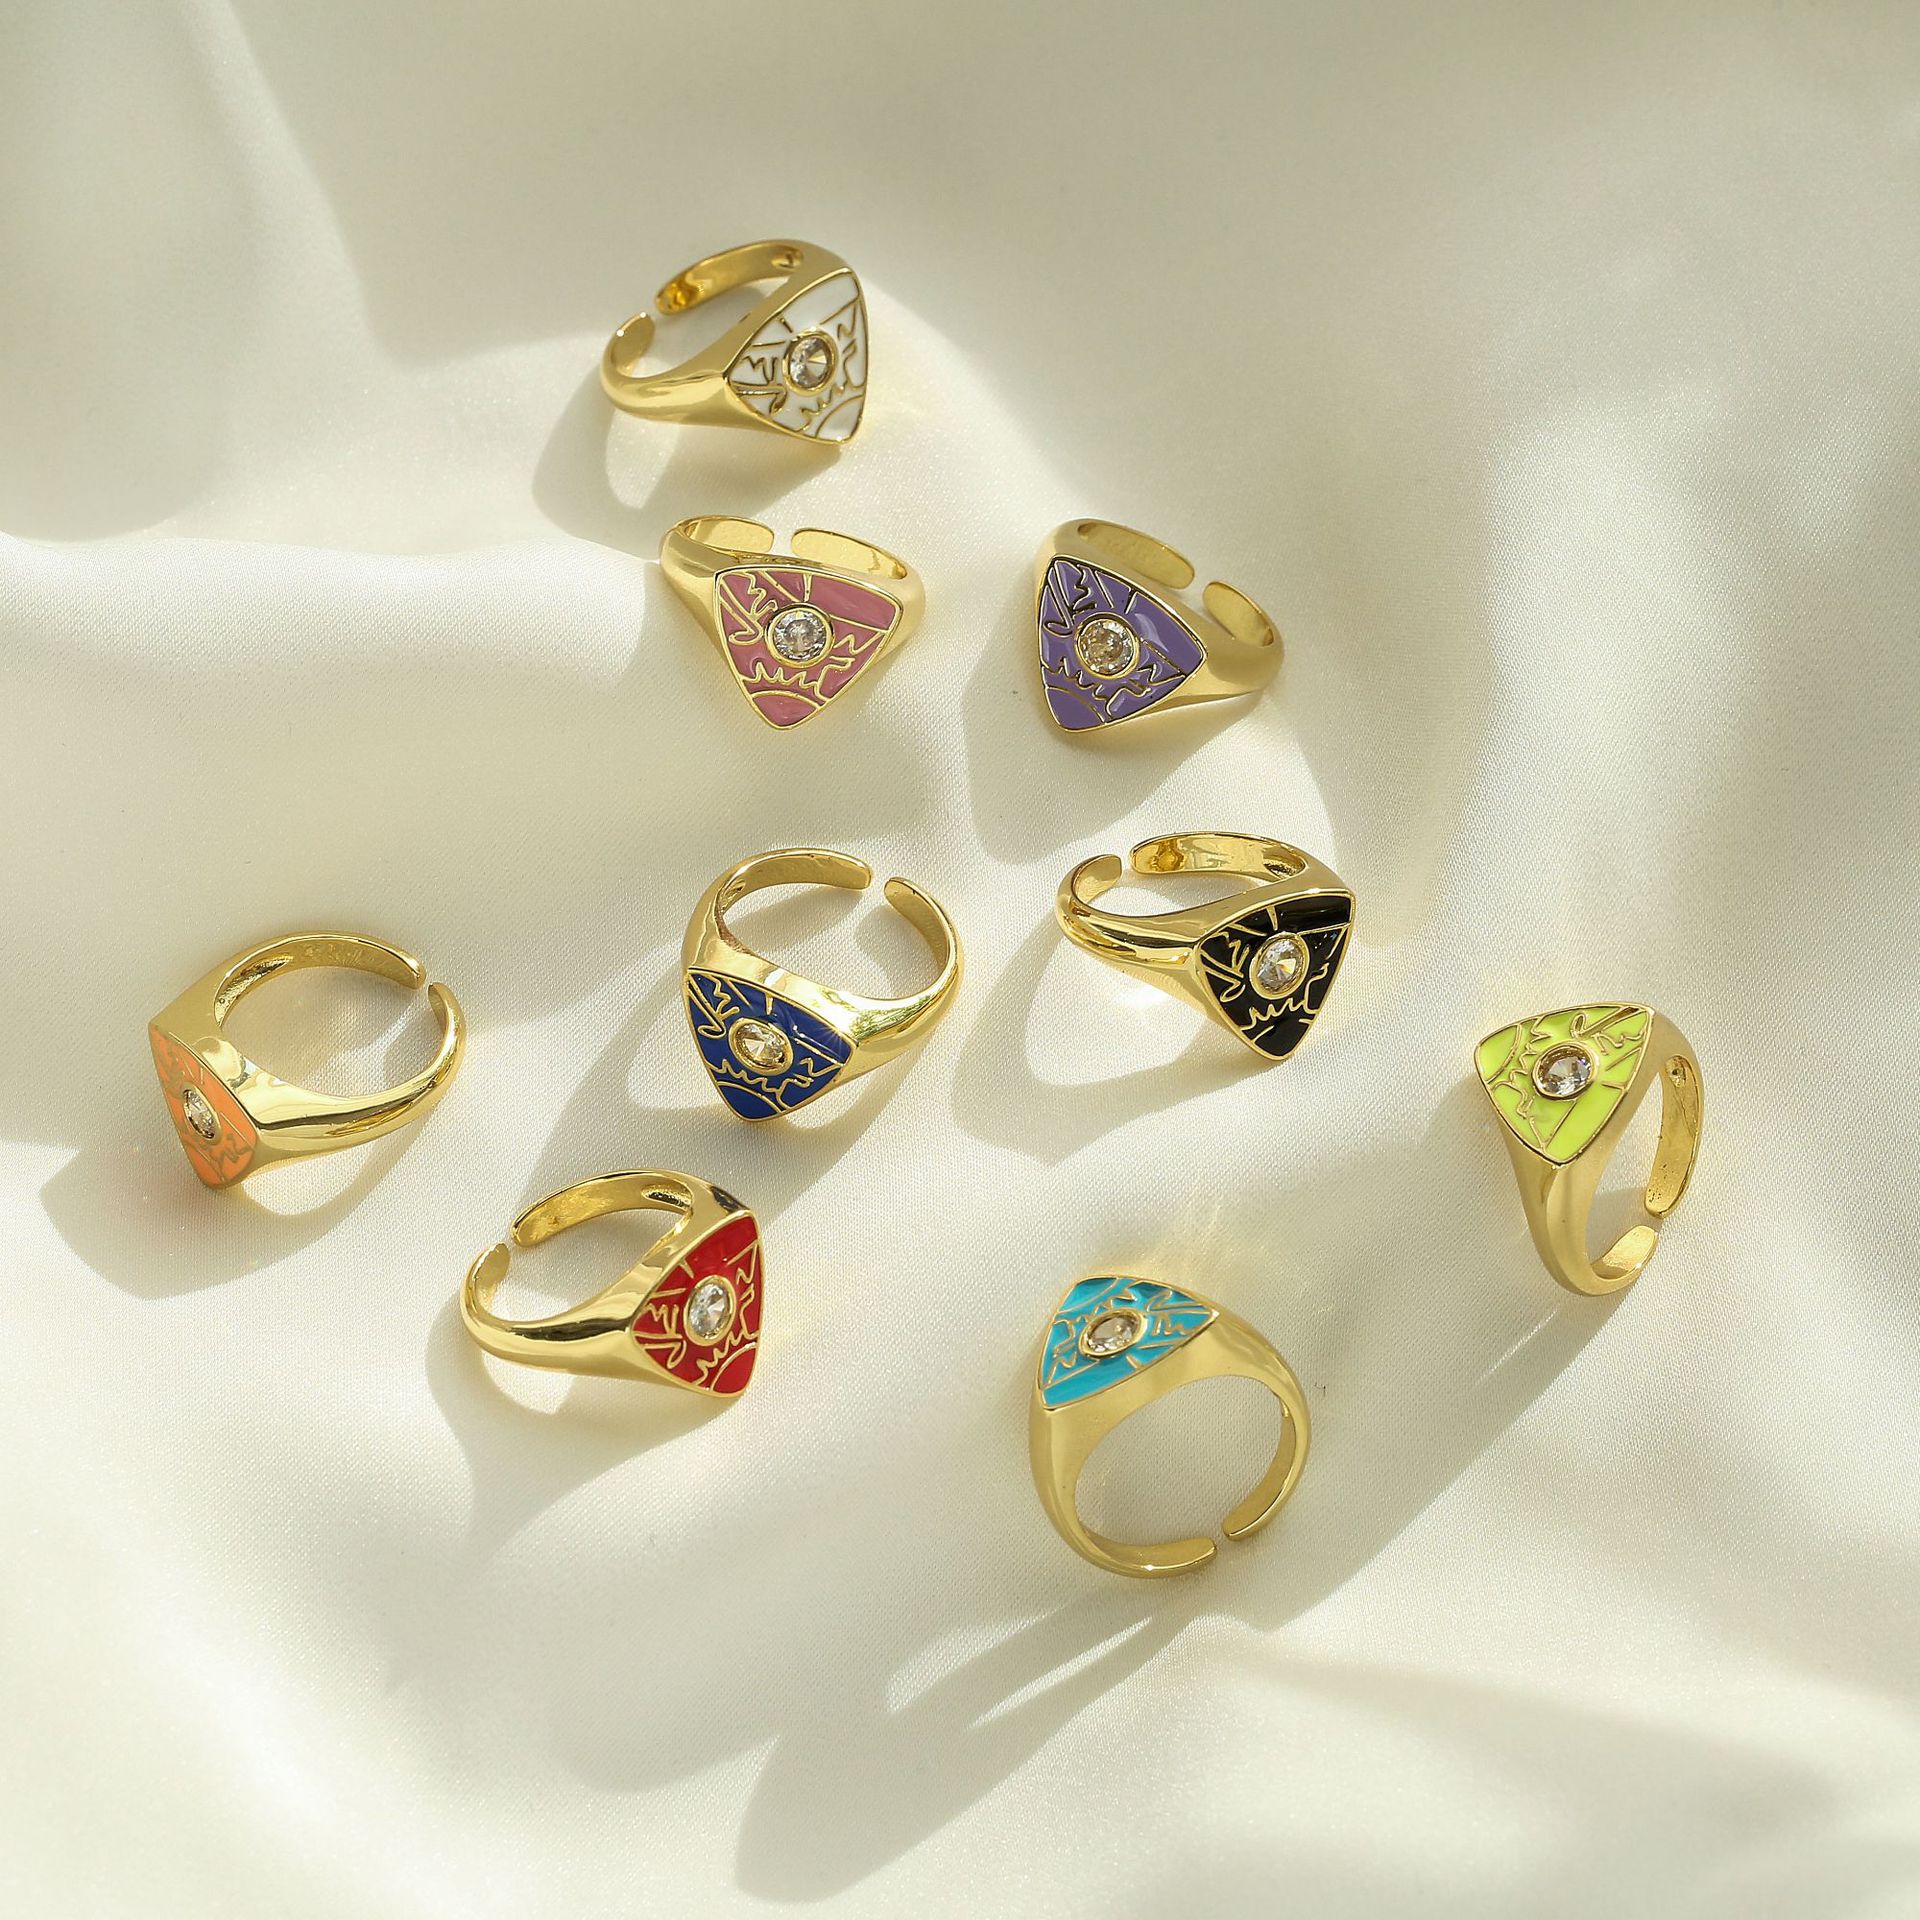 Hecheng Ornament Dripping Oil Triangle Pattern MicroInlaid Zircon Ring Open Ring Color Ring Vj303picture1